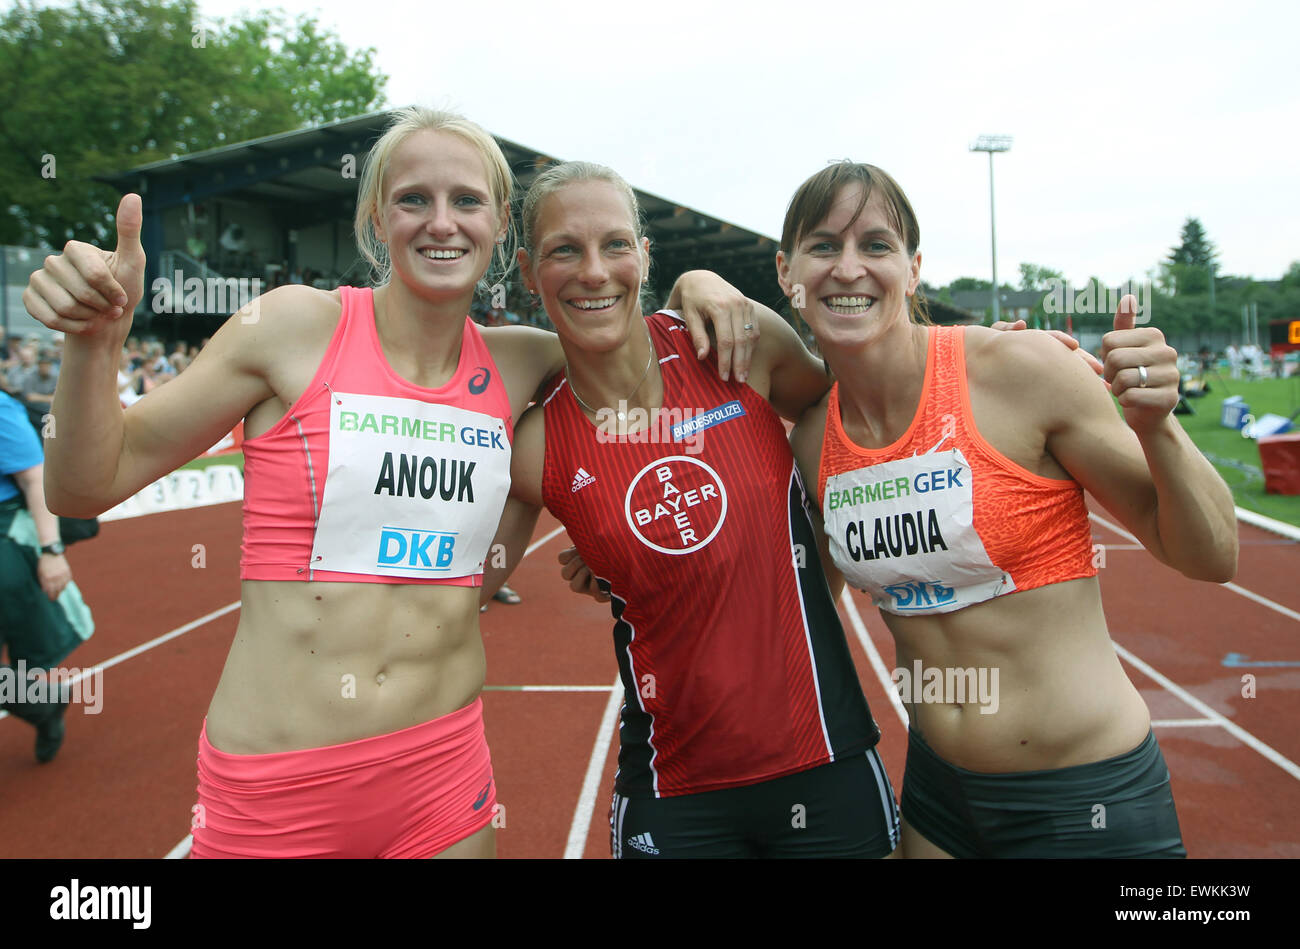 Ratingen, Germany. 28th June, 2015. First place heptathlete Anouk Vetter of the Netherlands (L), second place winner Jennifer Oeser (C) and third place winner Claudia Rath celebrate after the Multievent Meeting in Ratingen, Germany, 28 June 2015. Photo: INA FASSBENDER/dpa/Alamy Live News Stock Photo